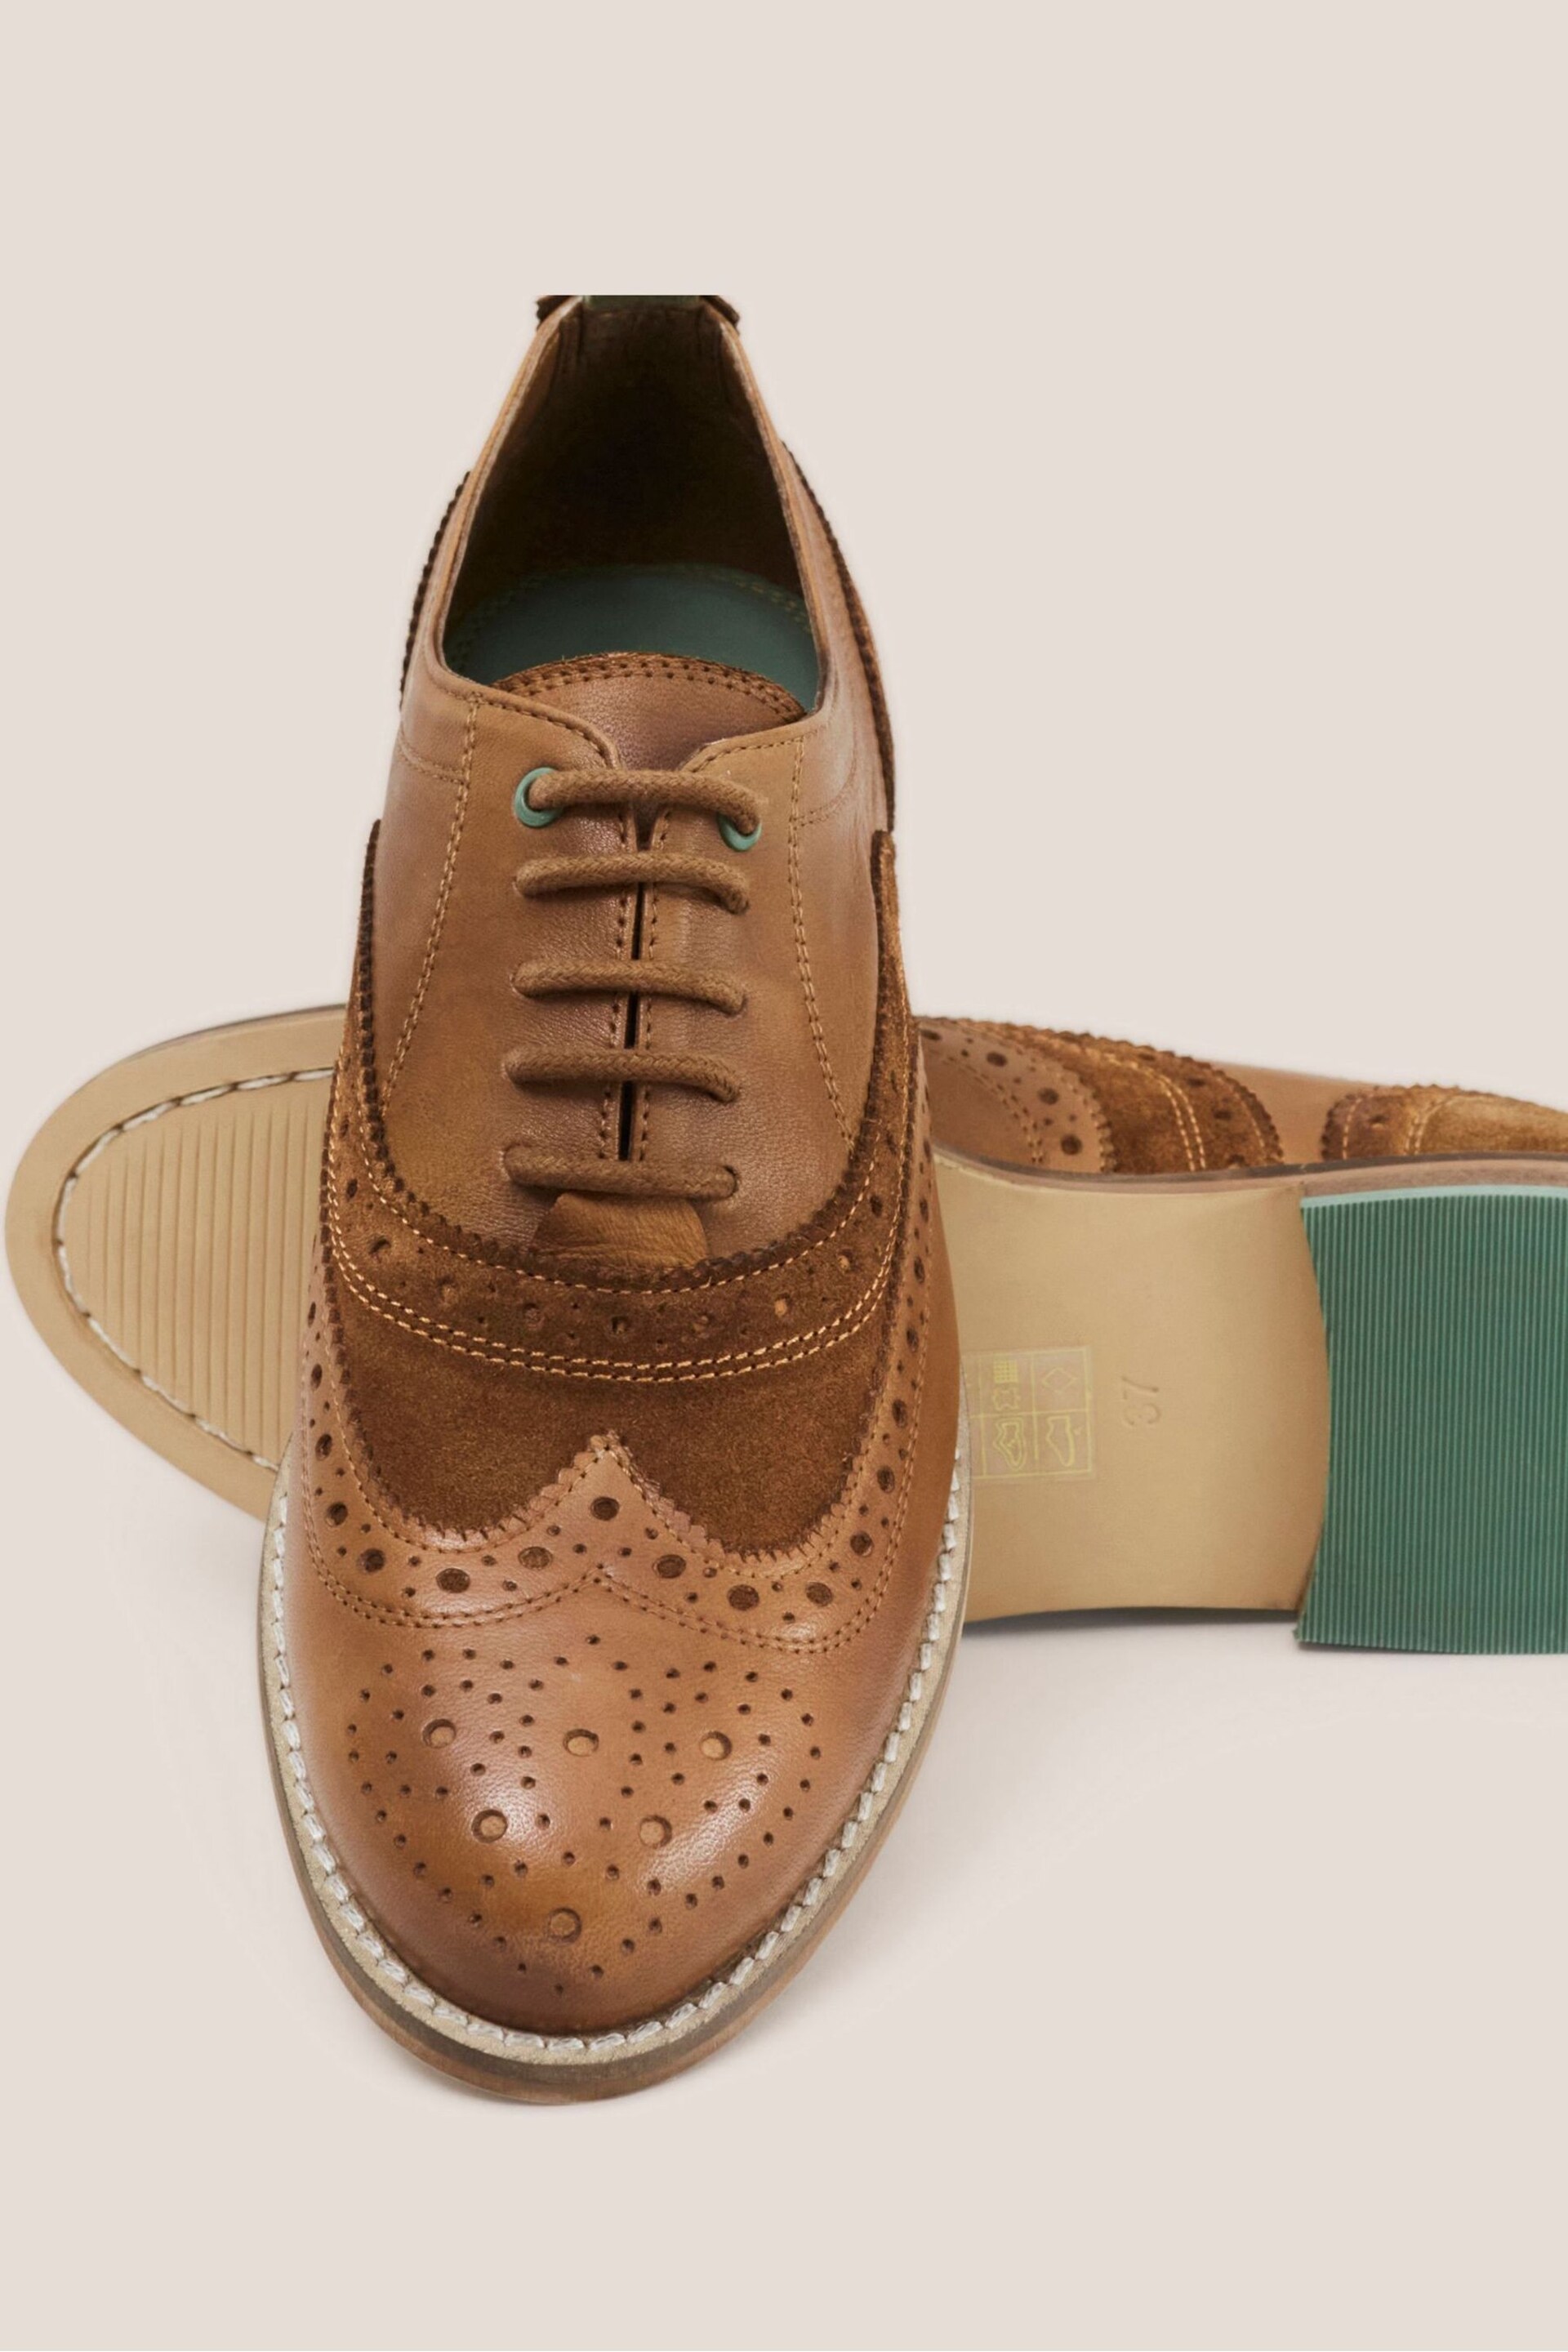 White Stuff Brown Thistle Leather Lace-Up Brogues - Image 4 of 4